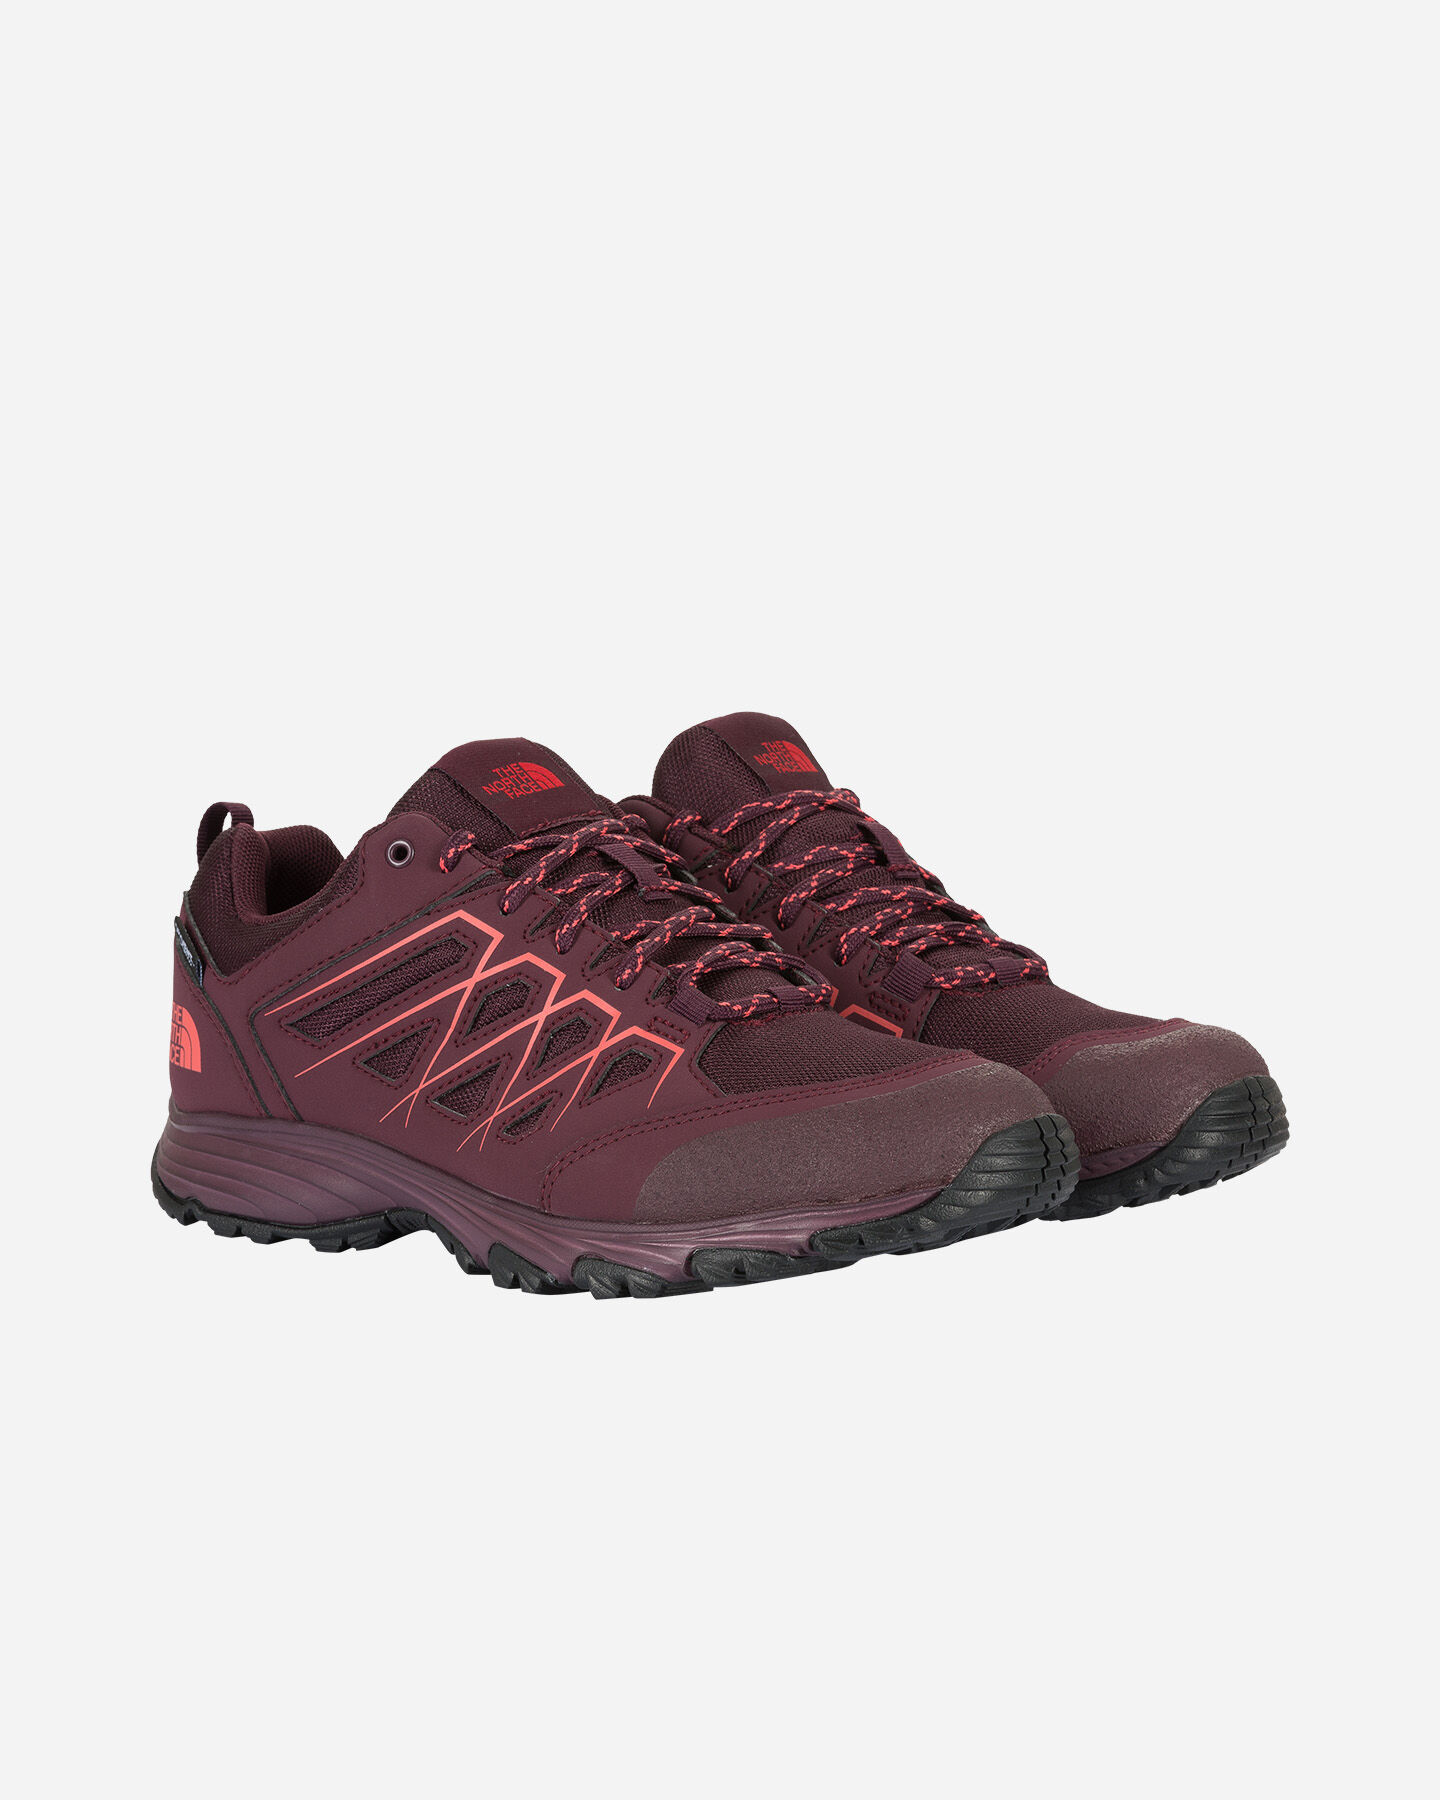  Scarpe trail THE NORTH FACE VENTURE FASTHIKE WP W S5181629|RB3|5 scatto 1